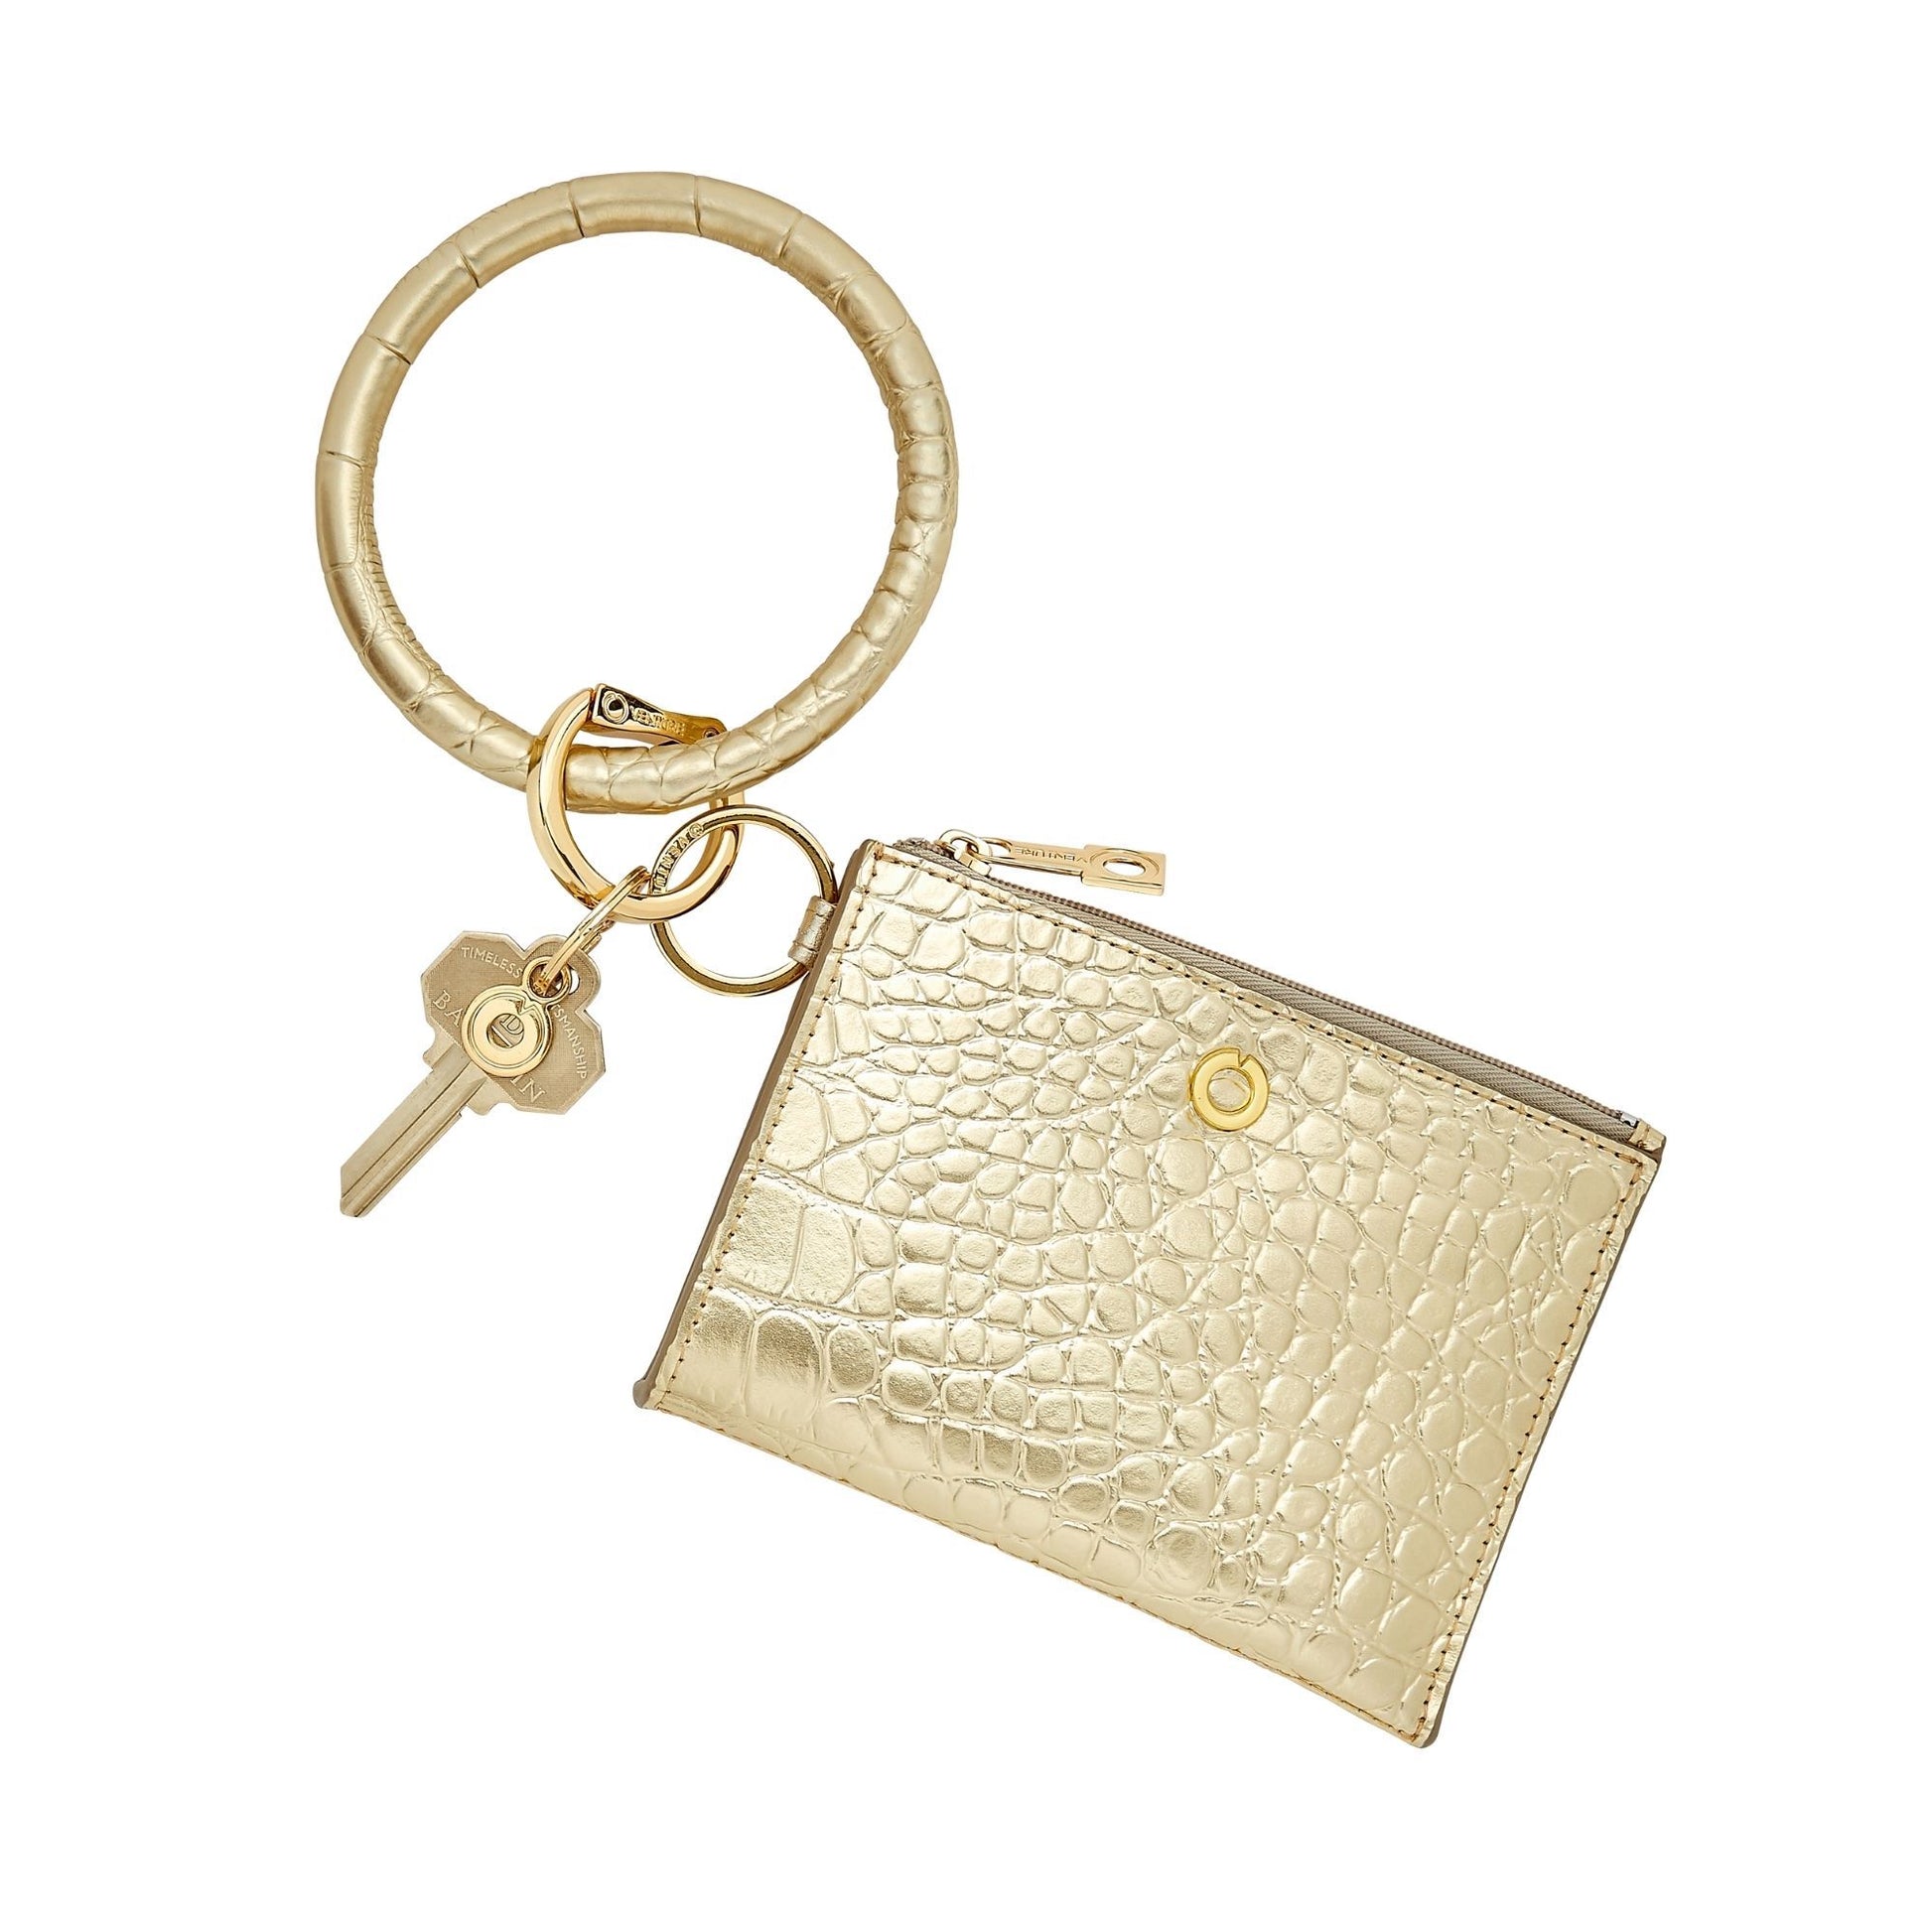 Solid Gold Rush Croc-Embossed - Ossential Leather Card Case by Oventure in solid Gold Rush Croc attached to the Big O Key ring in Solid Gold rush Croc